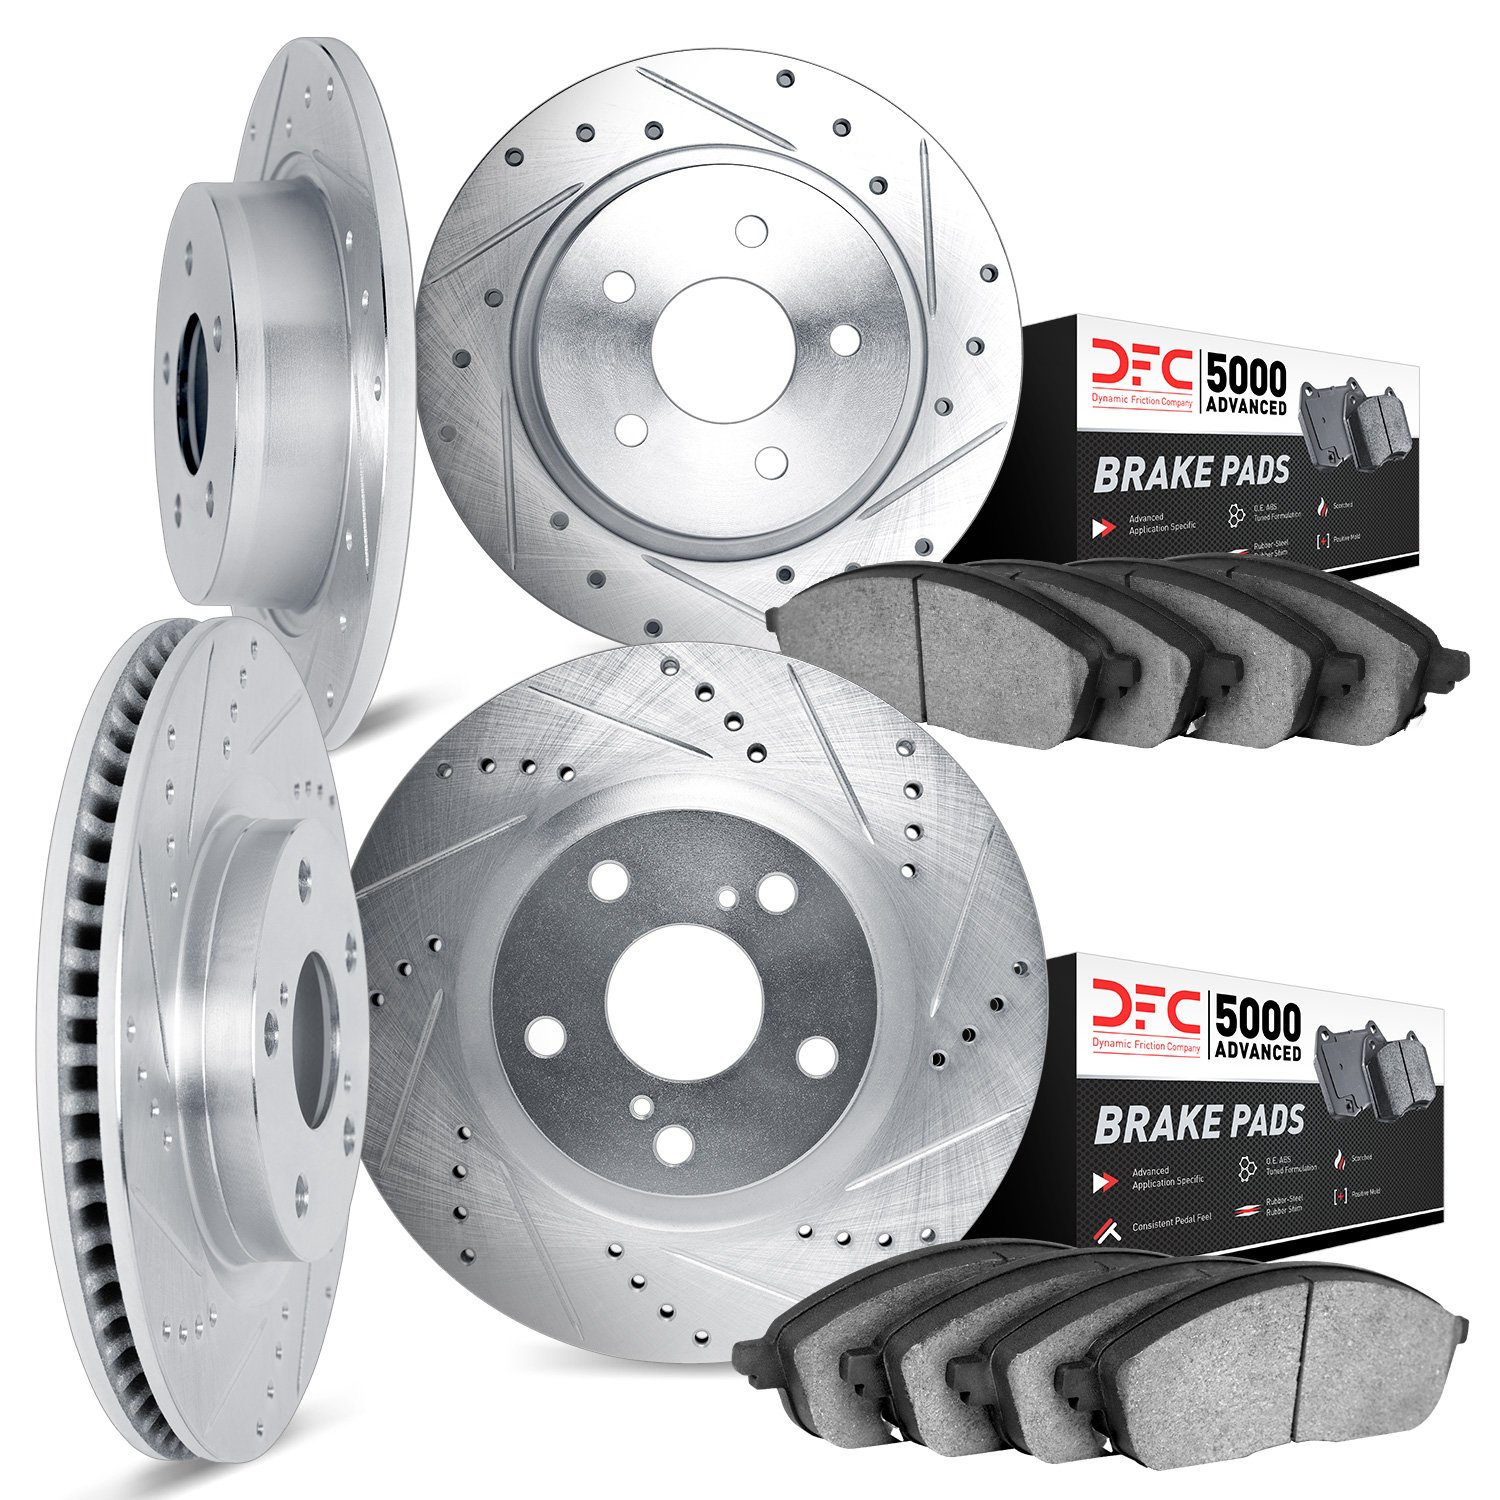 7504-72048 Drilled/Slotted Brake Rotors w/5000 Advanced Brake Pads Kit [Silver], 2004-2012 Mitsubishi, Position: Front and Rear